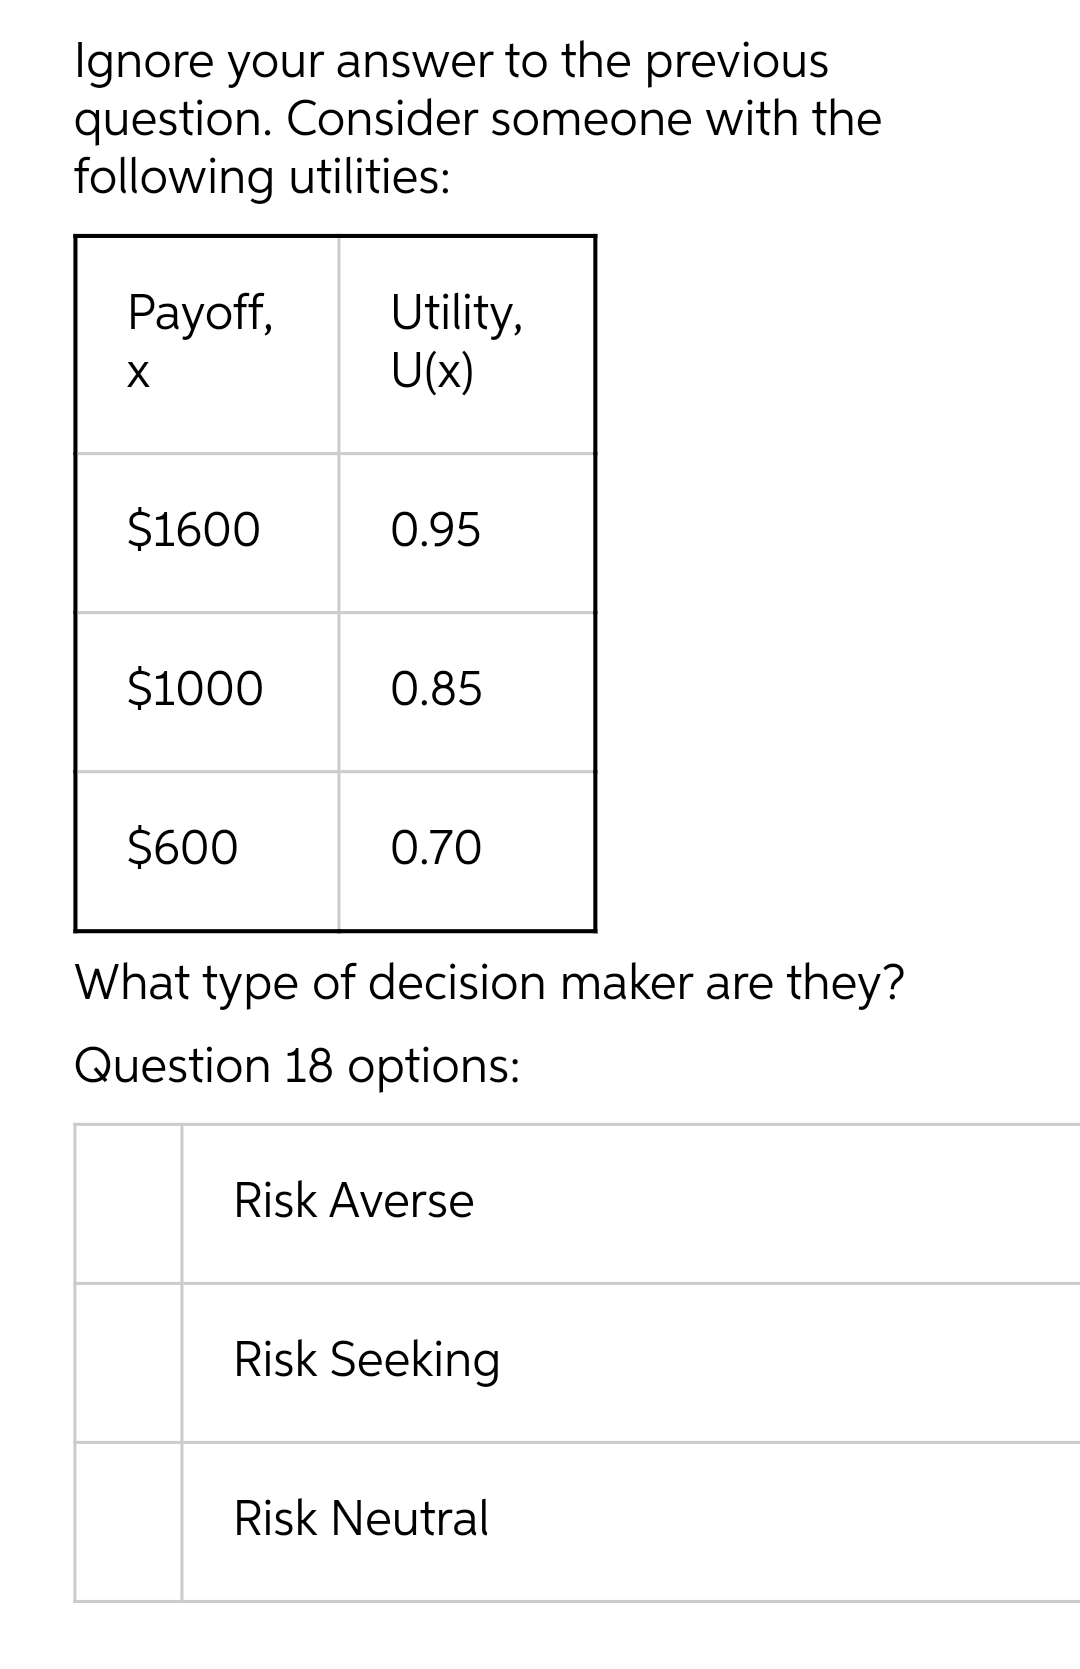 Ignore your answer to the previous
question. Consider someone with the
following utilities:
Utility,
U(x)
Payoff,
$1600
0.95
$1000
0.85
$600
0.70
What type of decision maker are they?
Question 18 options:
Risk Averse
Risk Seeking
Risk Neutral
